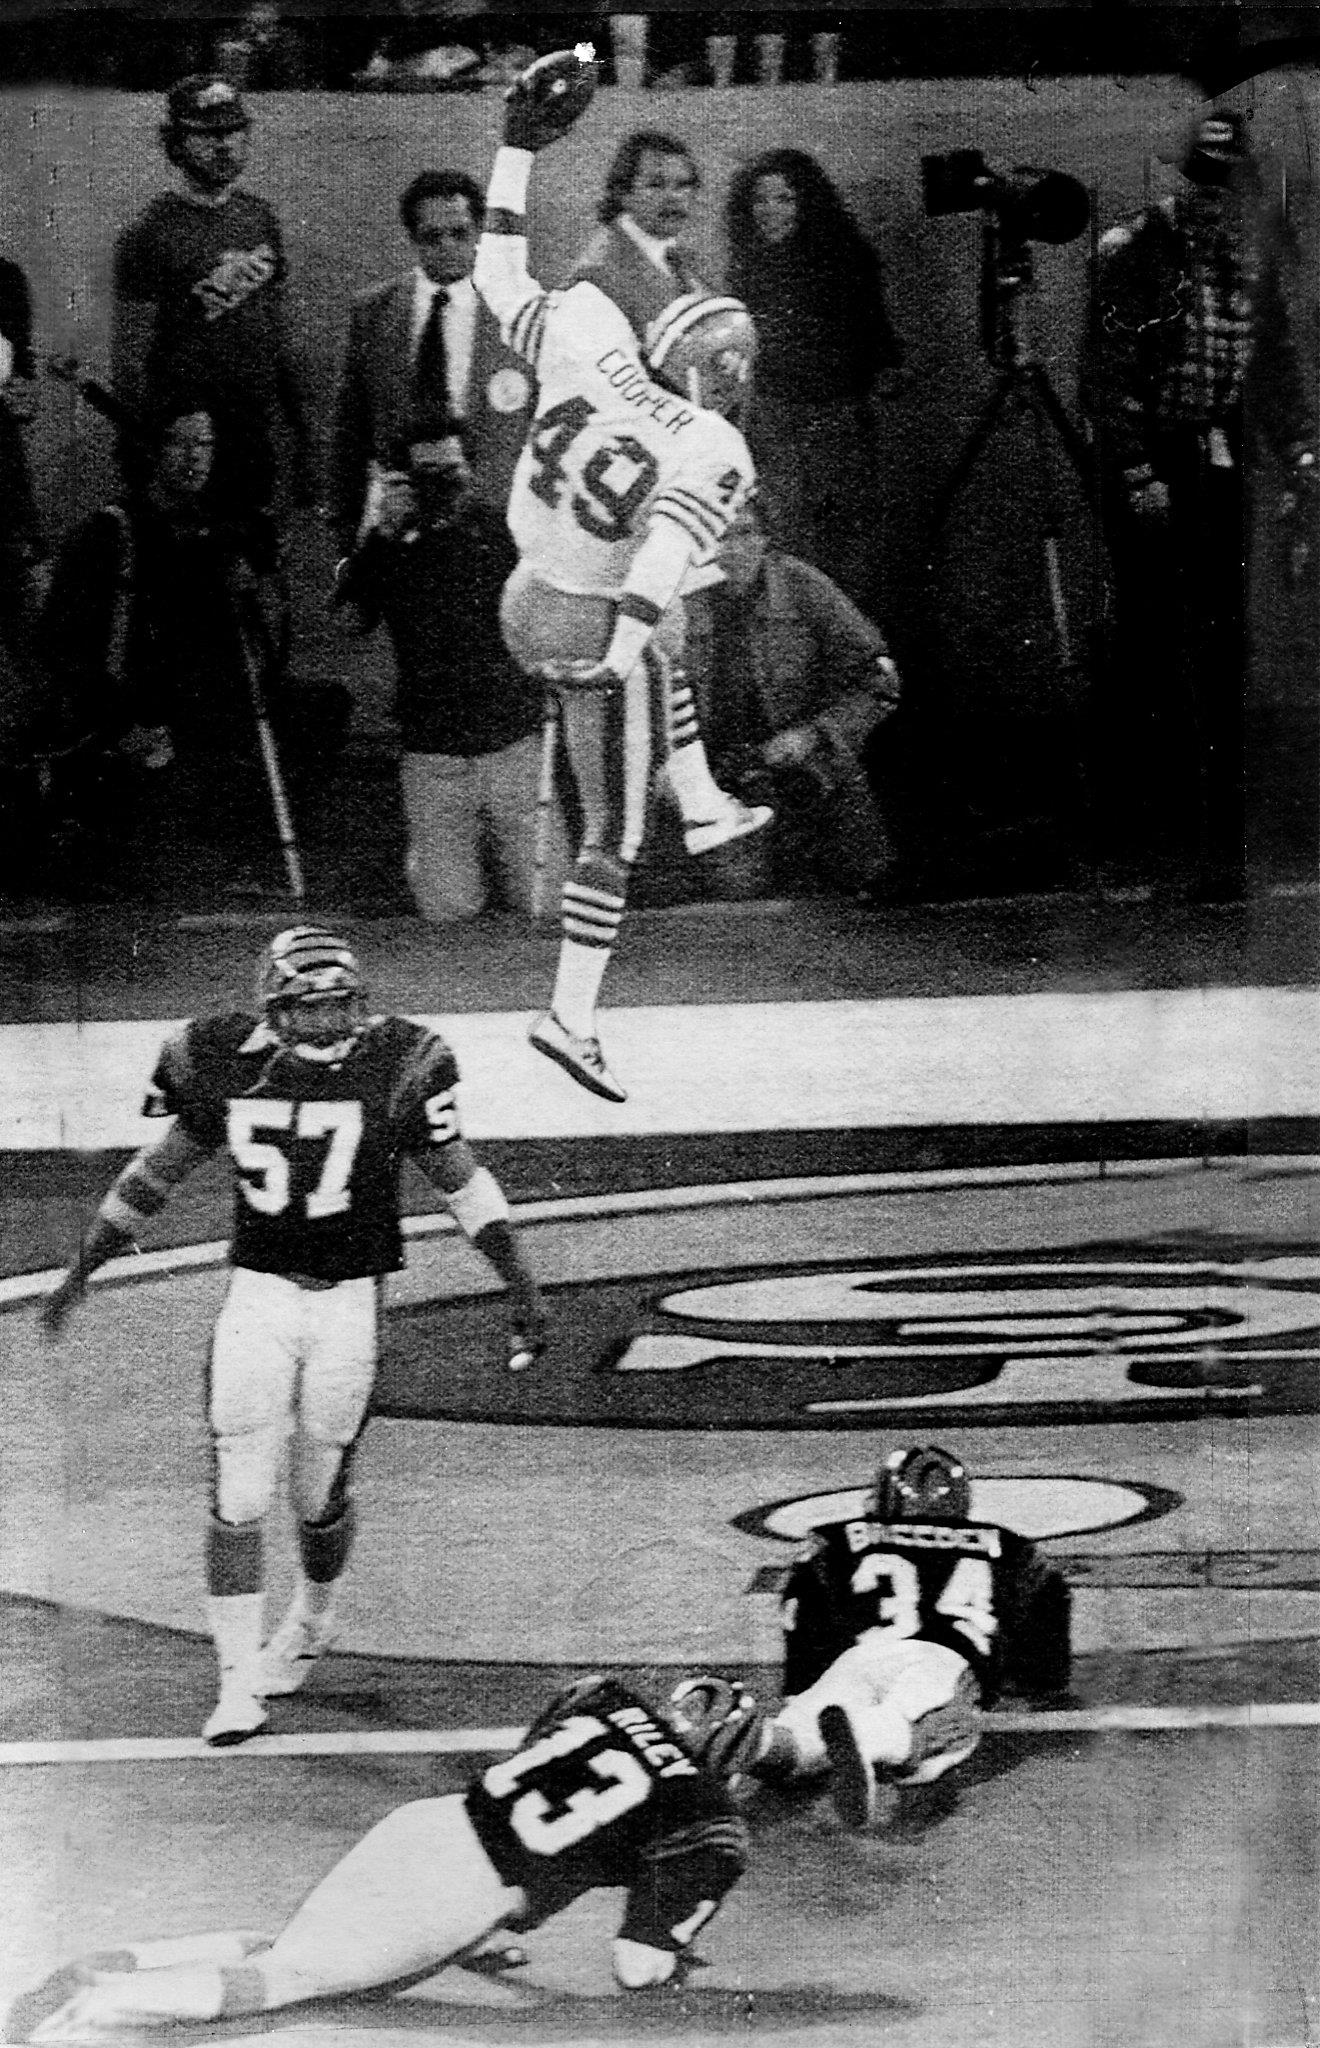 Jan. 24, 1982: 49ers Win Their First Lombardi Trophy in Super Bowl XVI